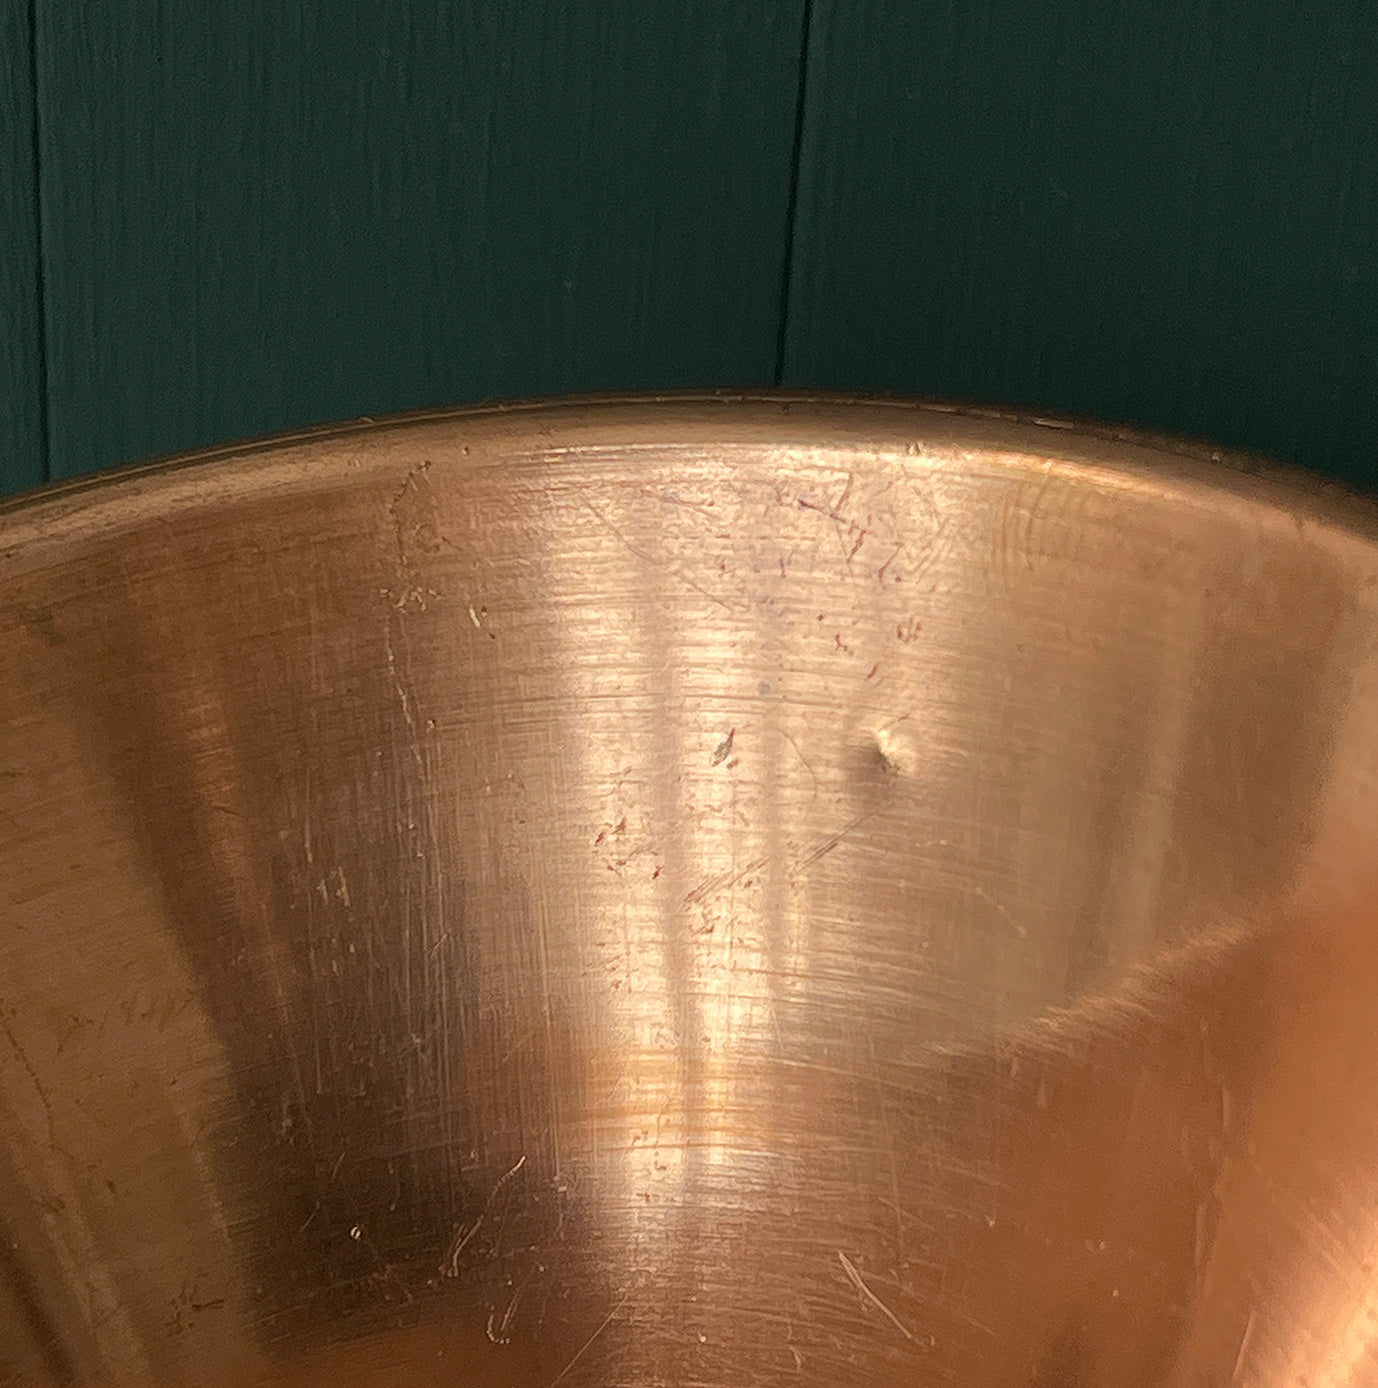 Quality Vintage Copper Funnel. Ideal for the Kitchen - SHOP NOW - www.intovintage.co.uk